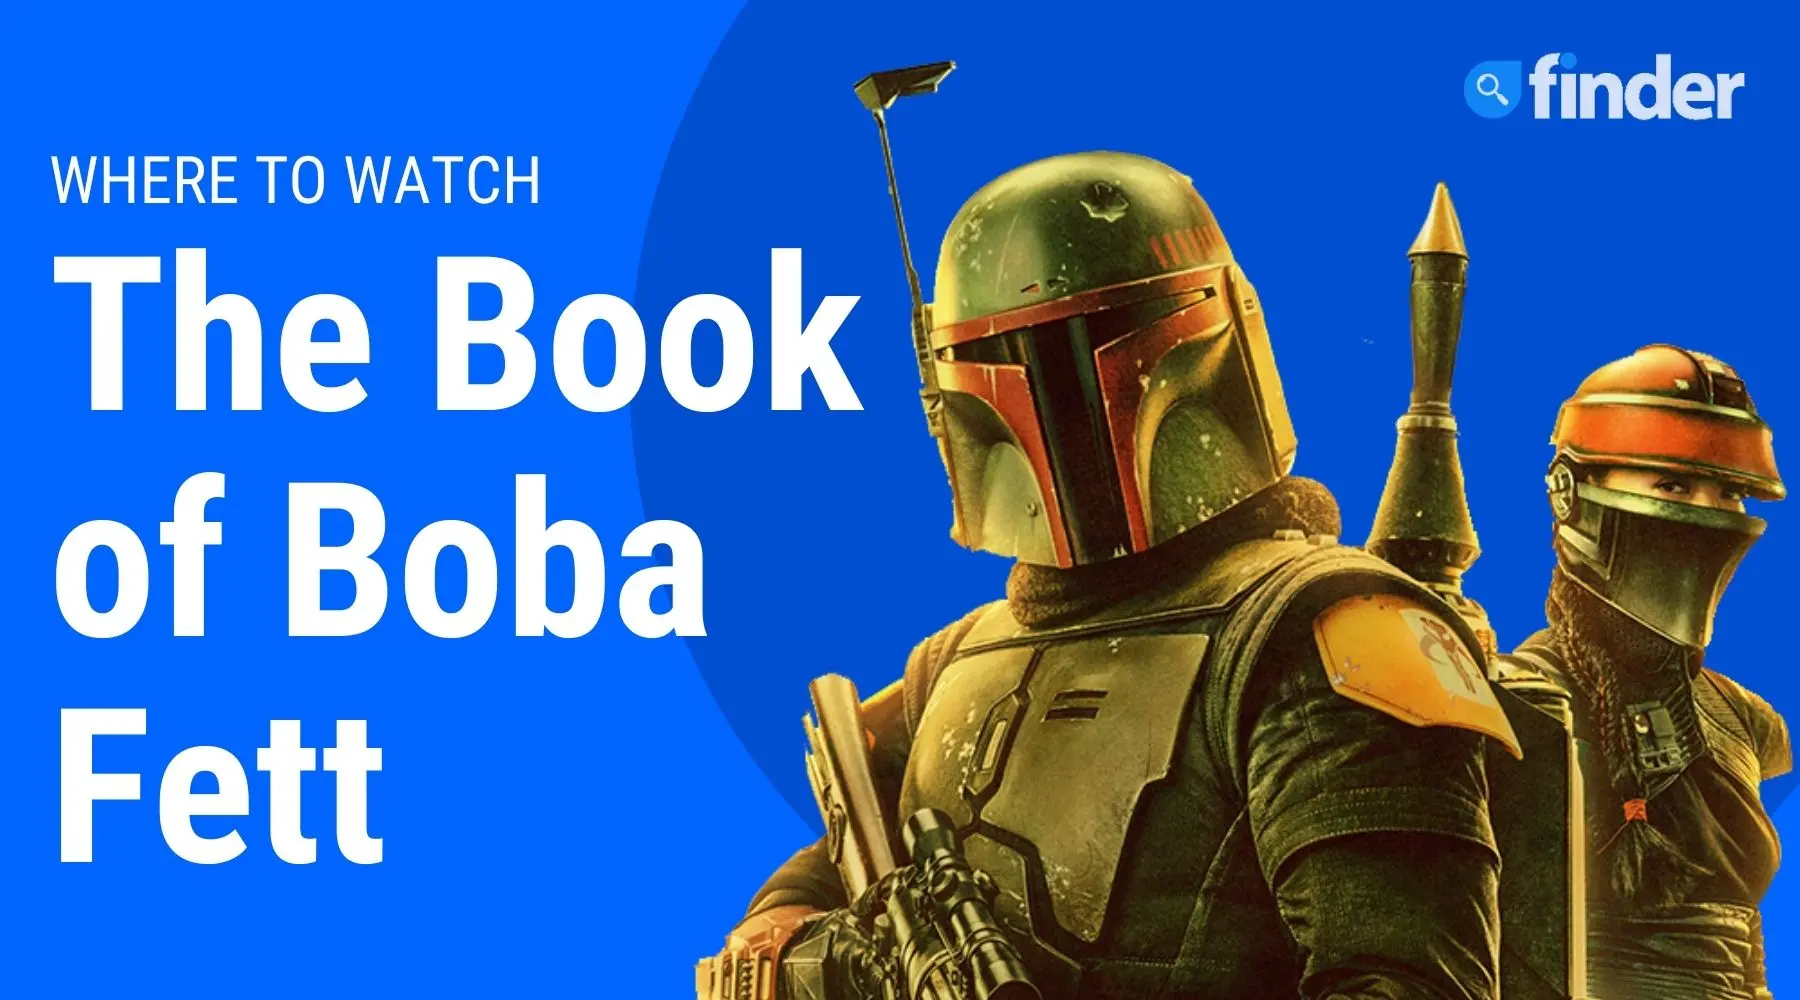 Where to watch Star Wars The Book of Boba Fett online in Australia